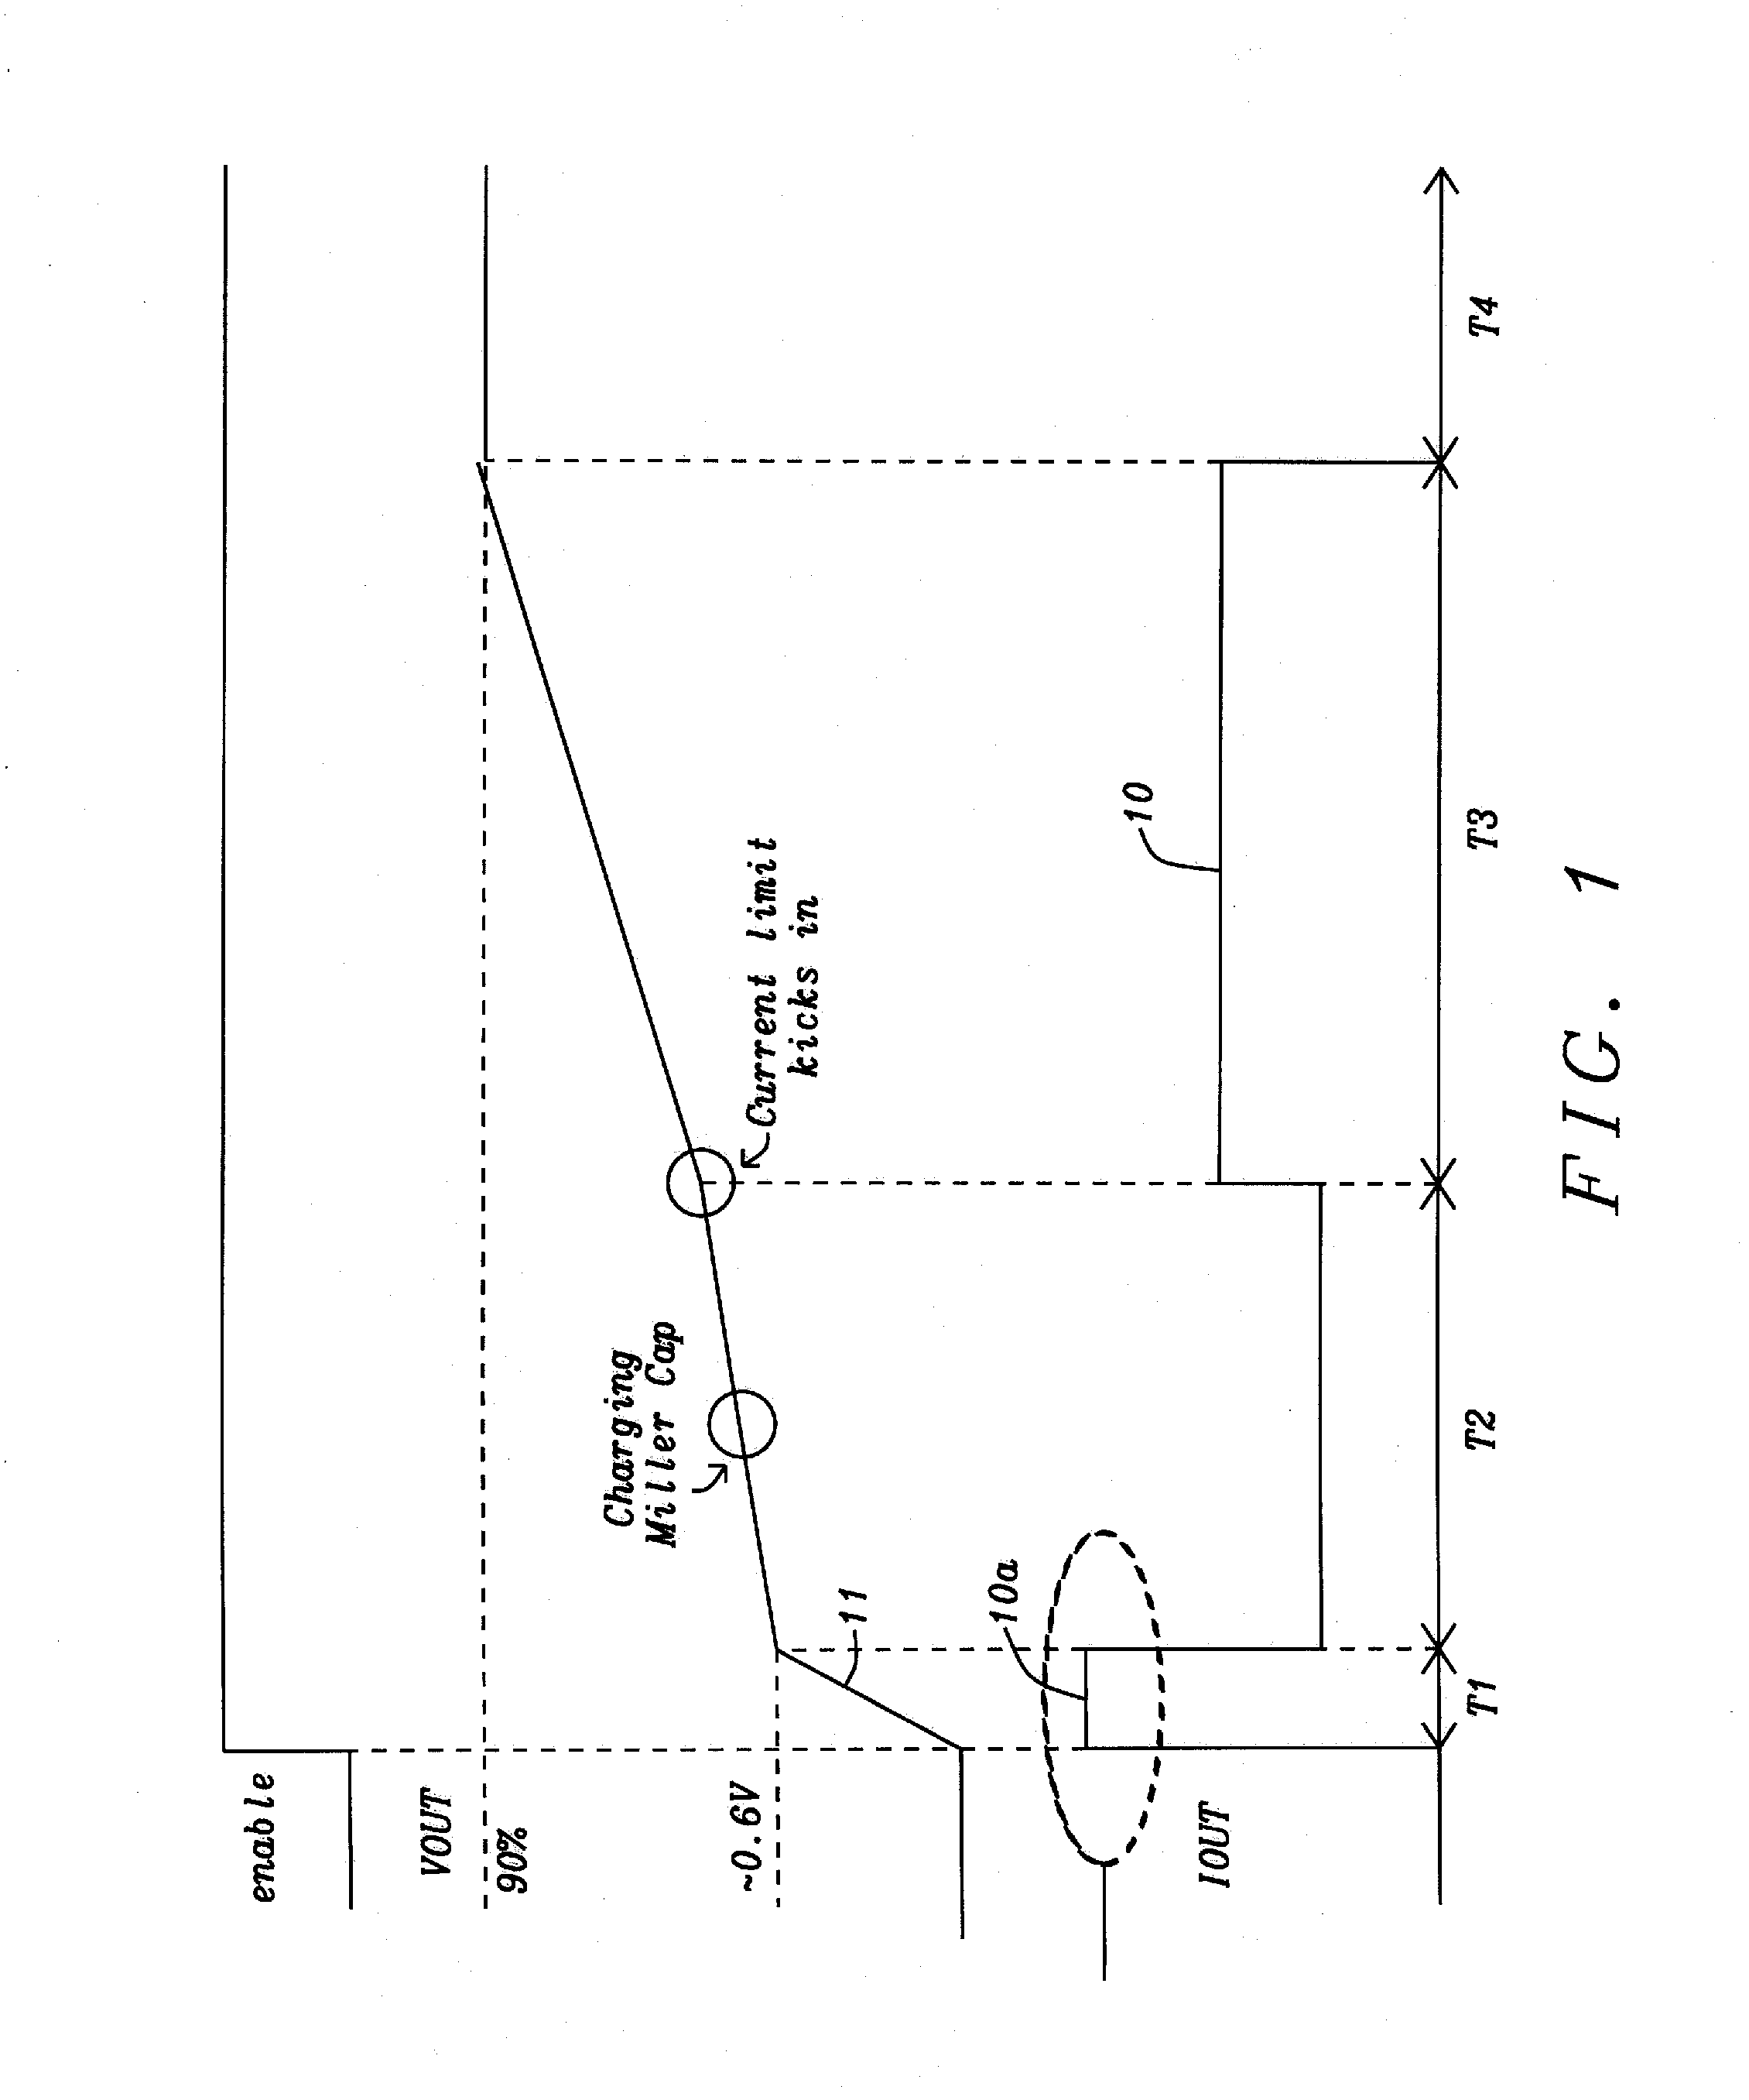 Method to Limit the Inrush Current in Large Output Capacitance LDO's